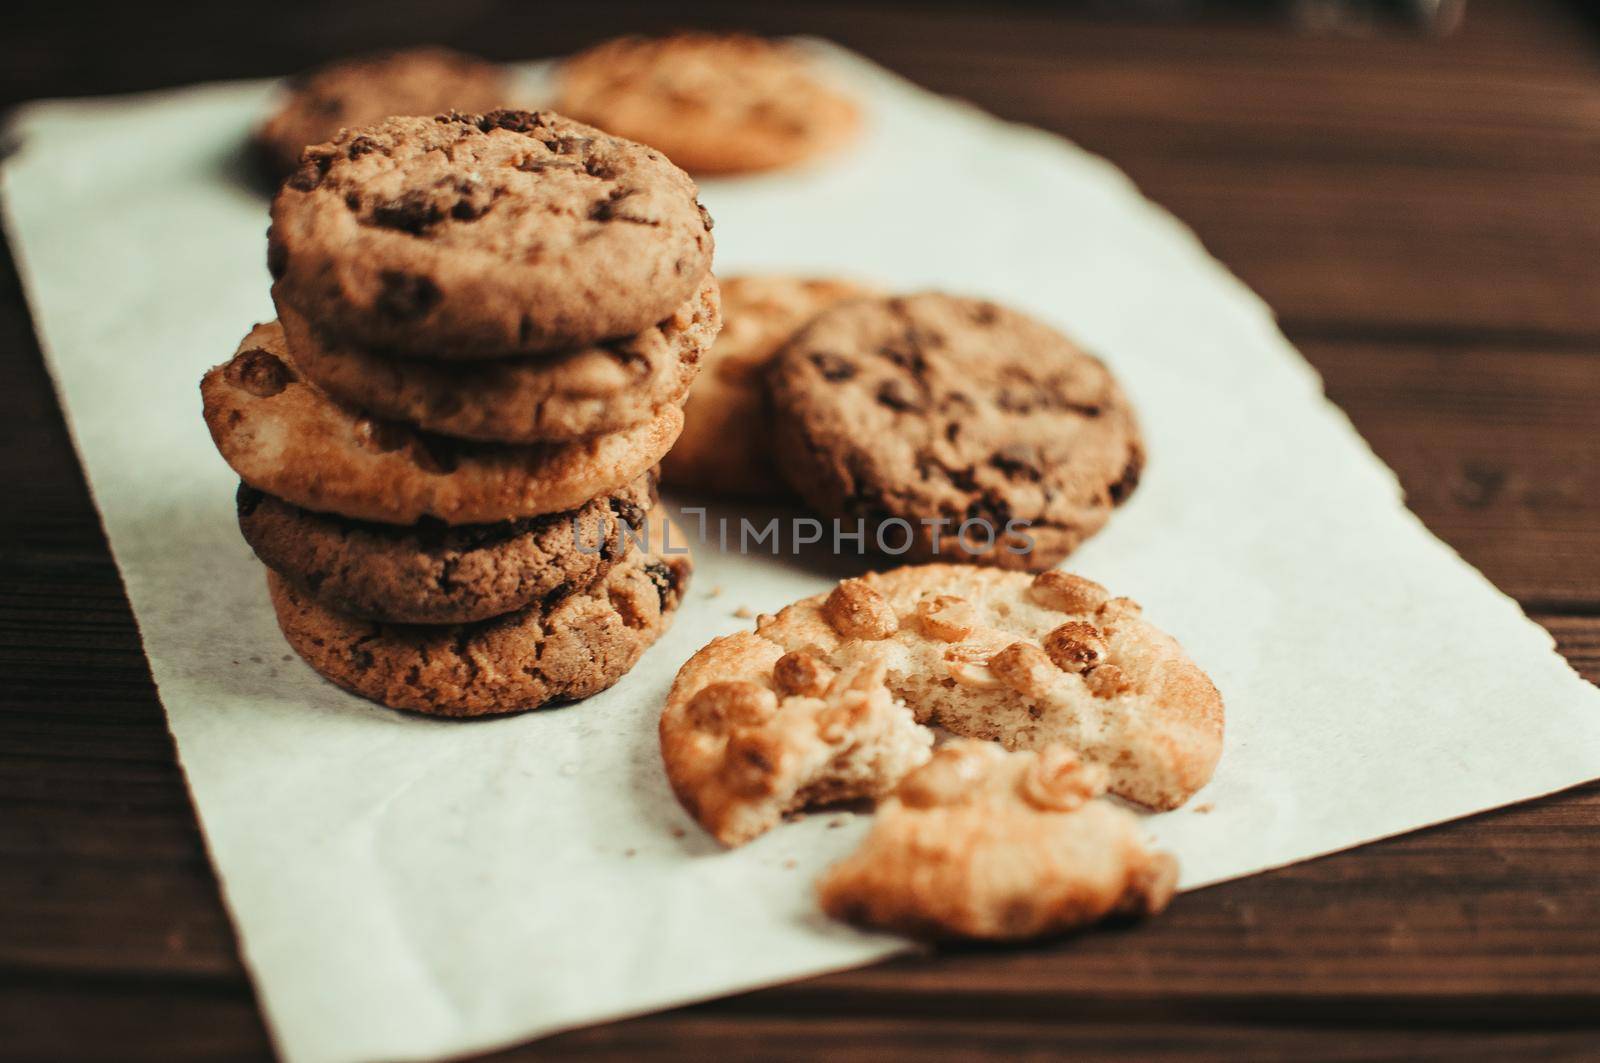 Chocolate cookies on parchment paper. Broken biscuits on a wooden table. Selective focus.